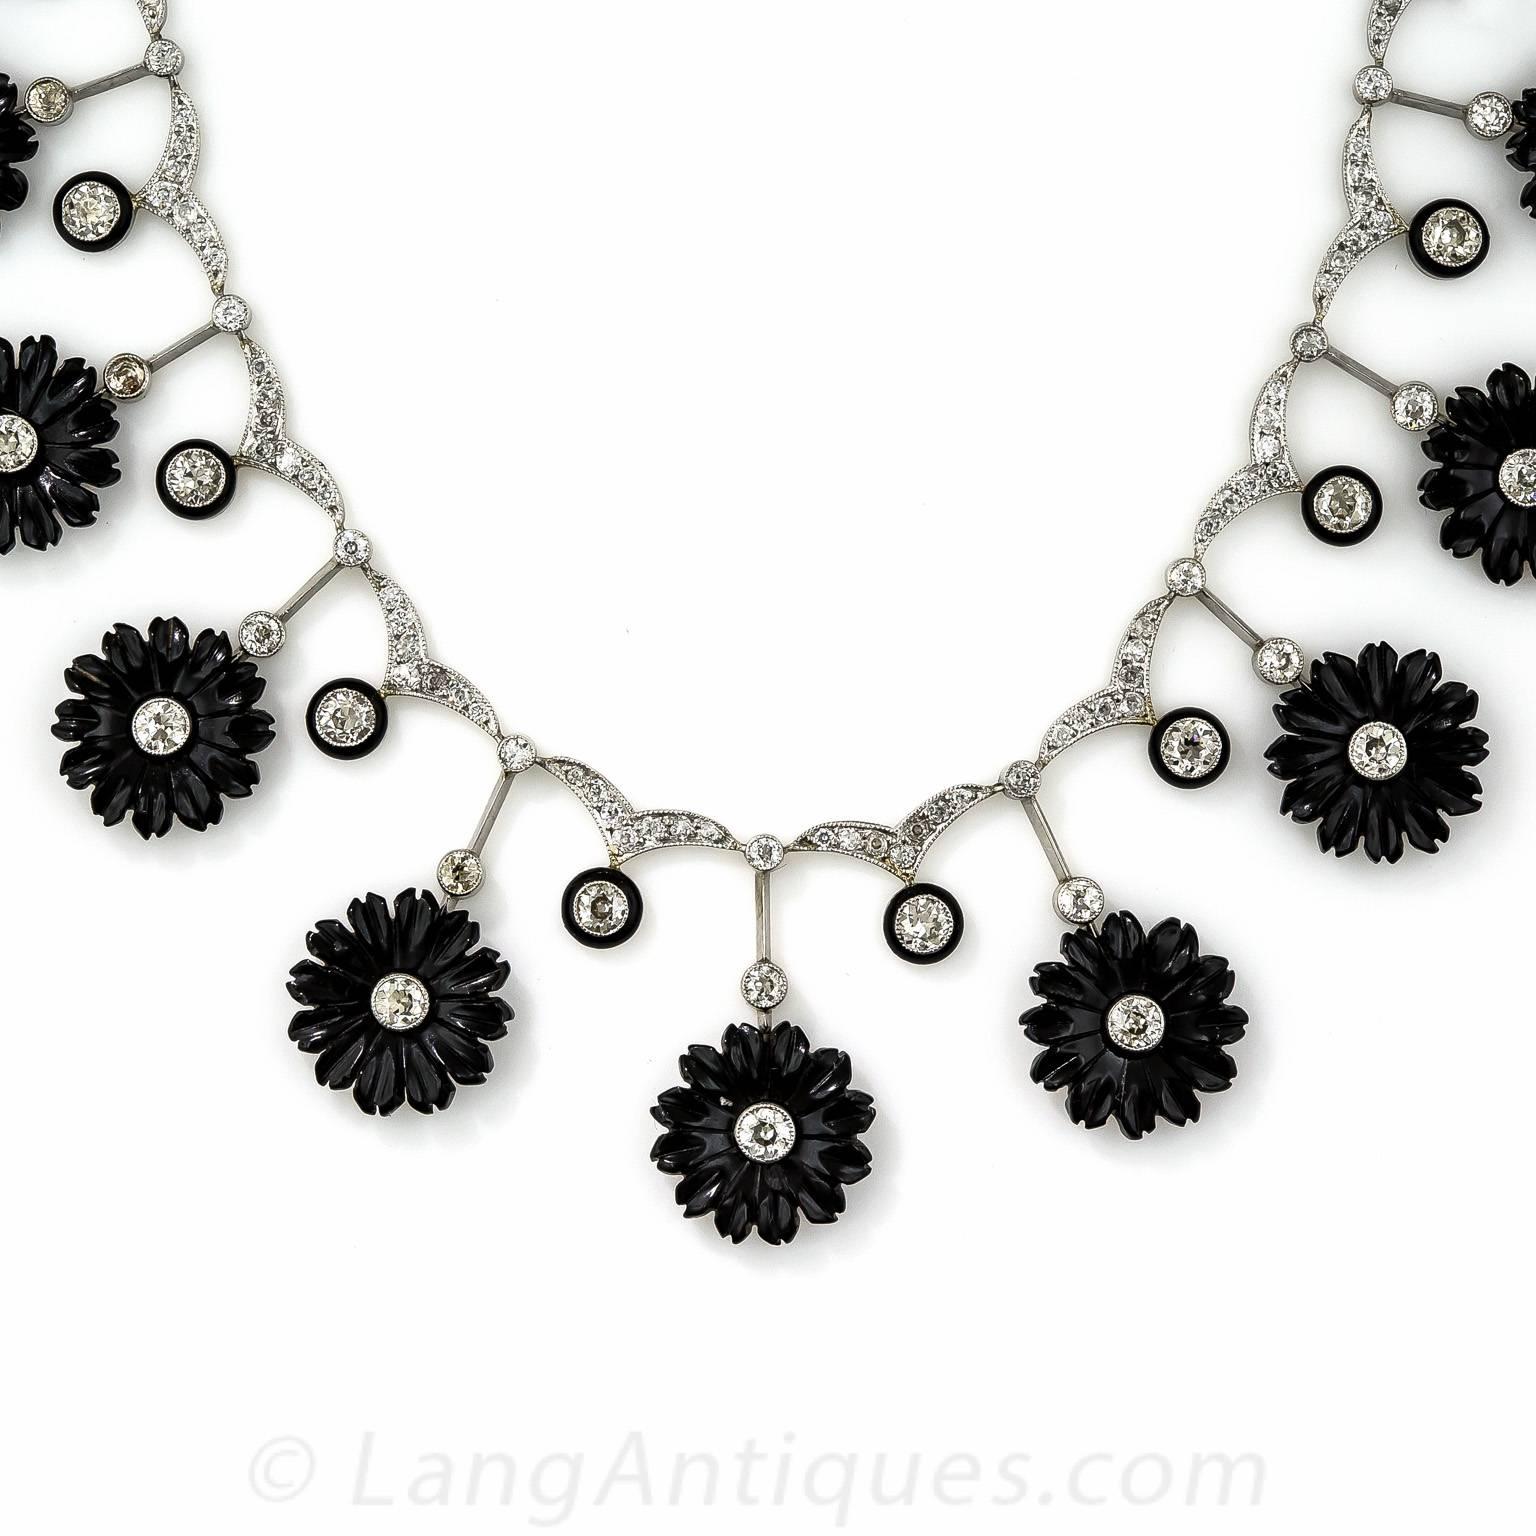 A unique and supremely beautiful late-Edwardian/early-Art Deco necklace in glorious black & white. 15 hand carved, diamond centered onyx flowers alternate with black enamel outlined European-cut diamonds, all of which suspend from a glittering